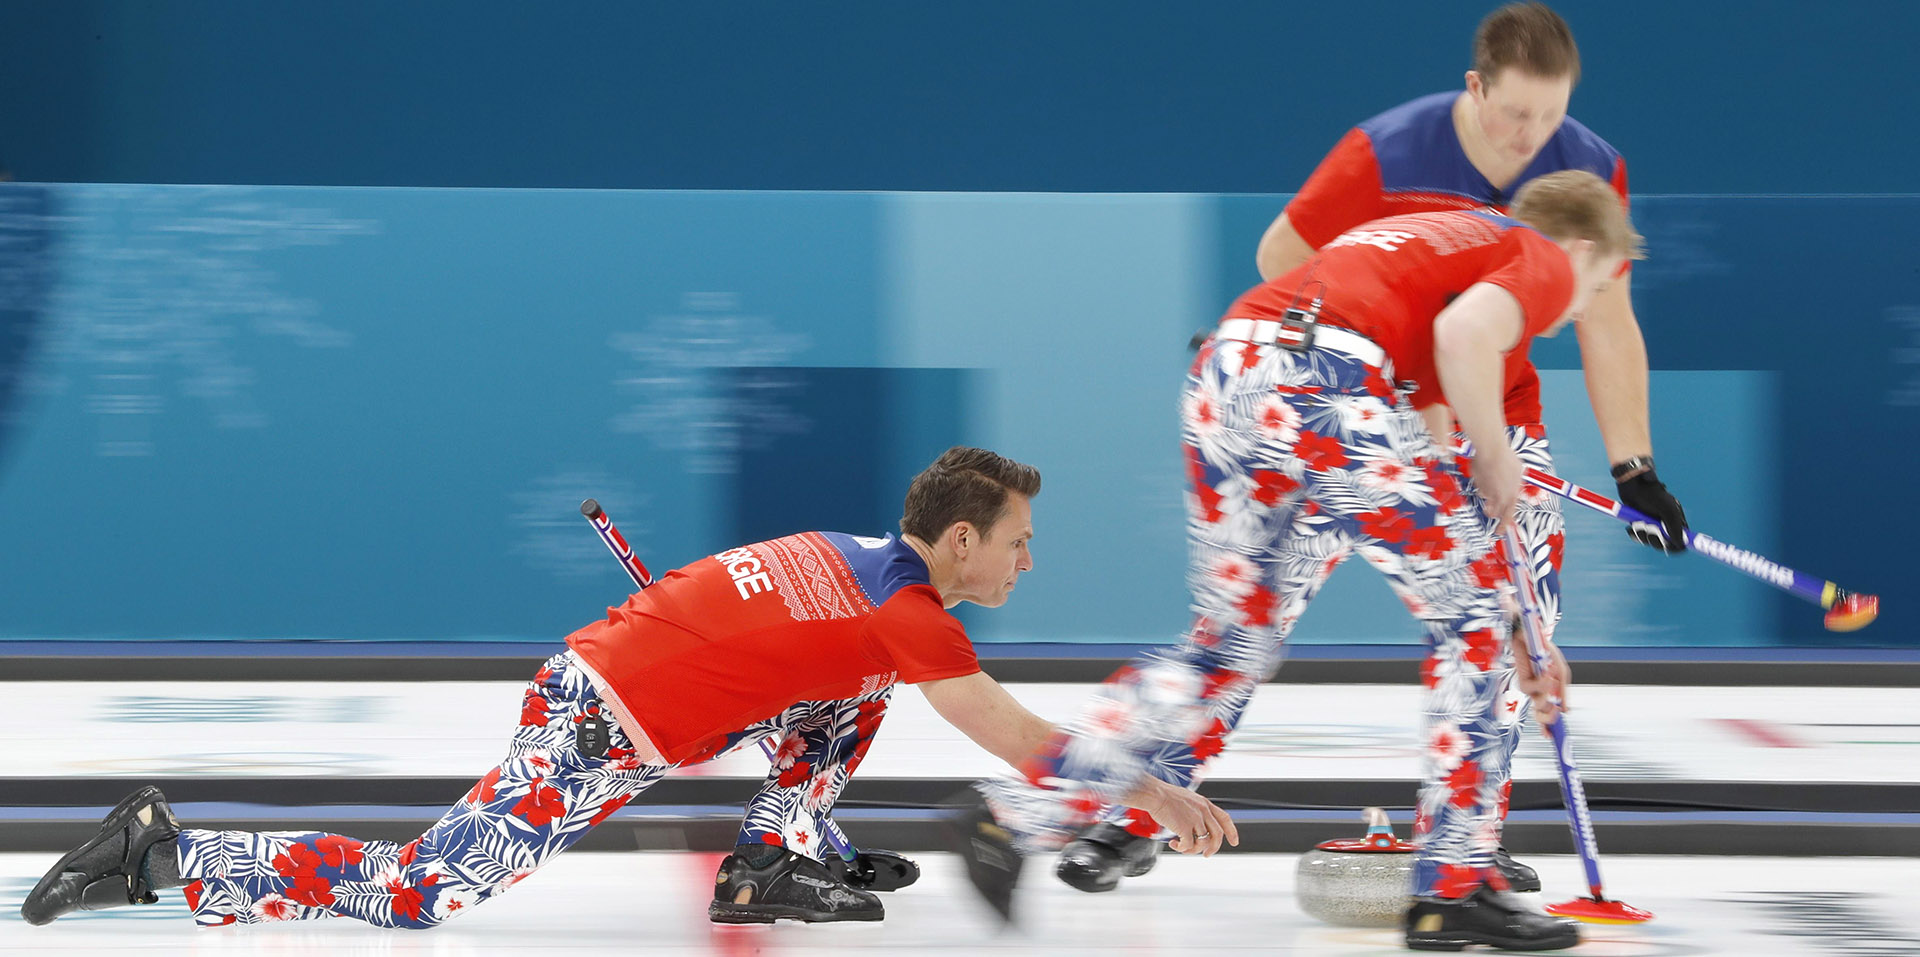 Thomas Ulsrud, curler known for flamboyant pants, dies following battle with cancer